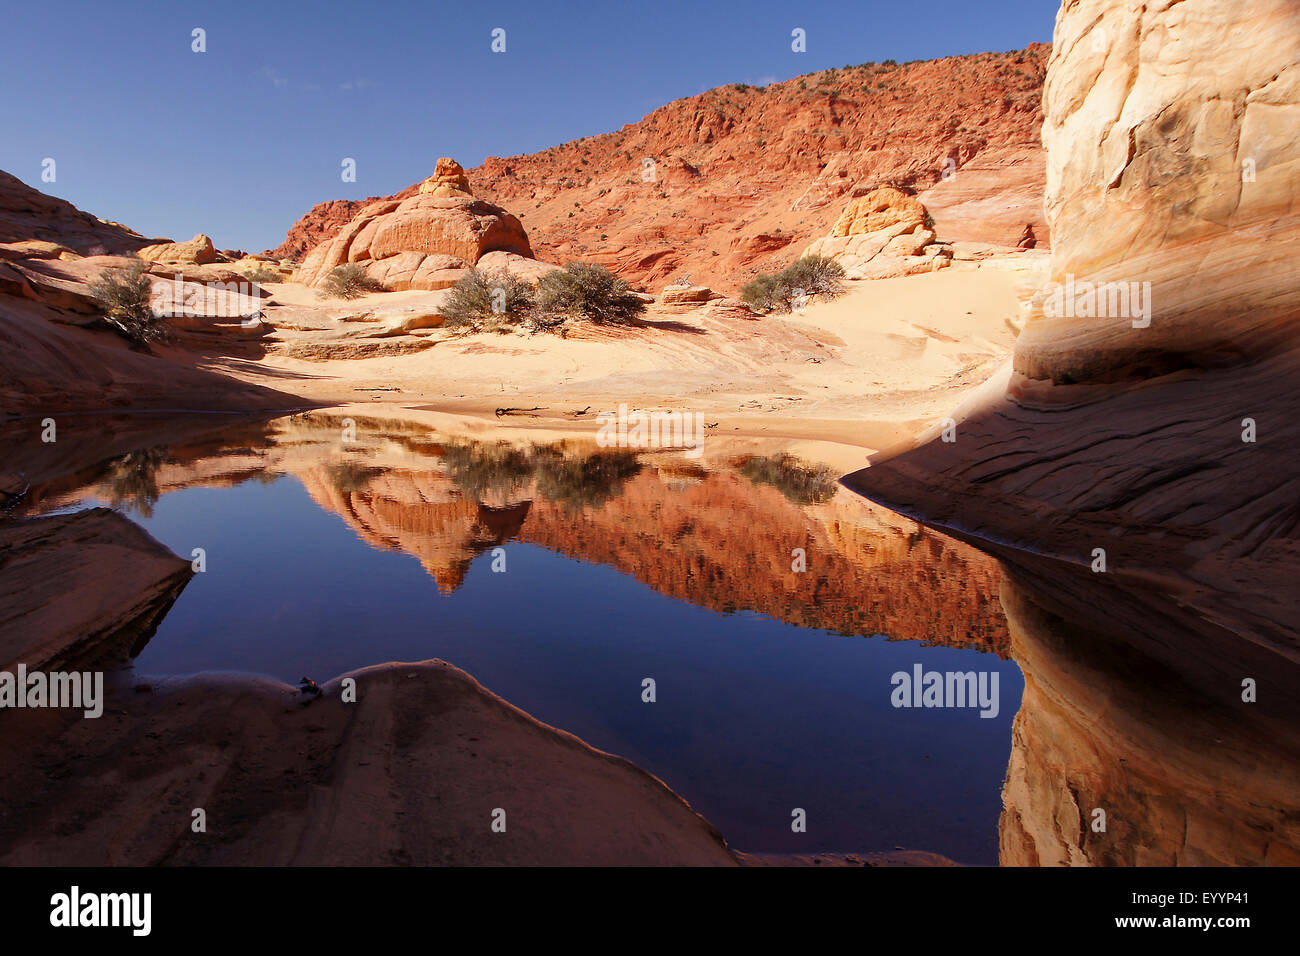 sand rock formation mirroring in a lake, USA, Arizona, Vermilion Cliffs National Monument Stock Photo